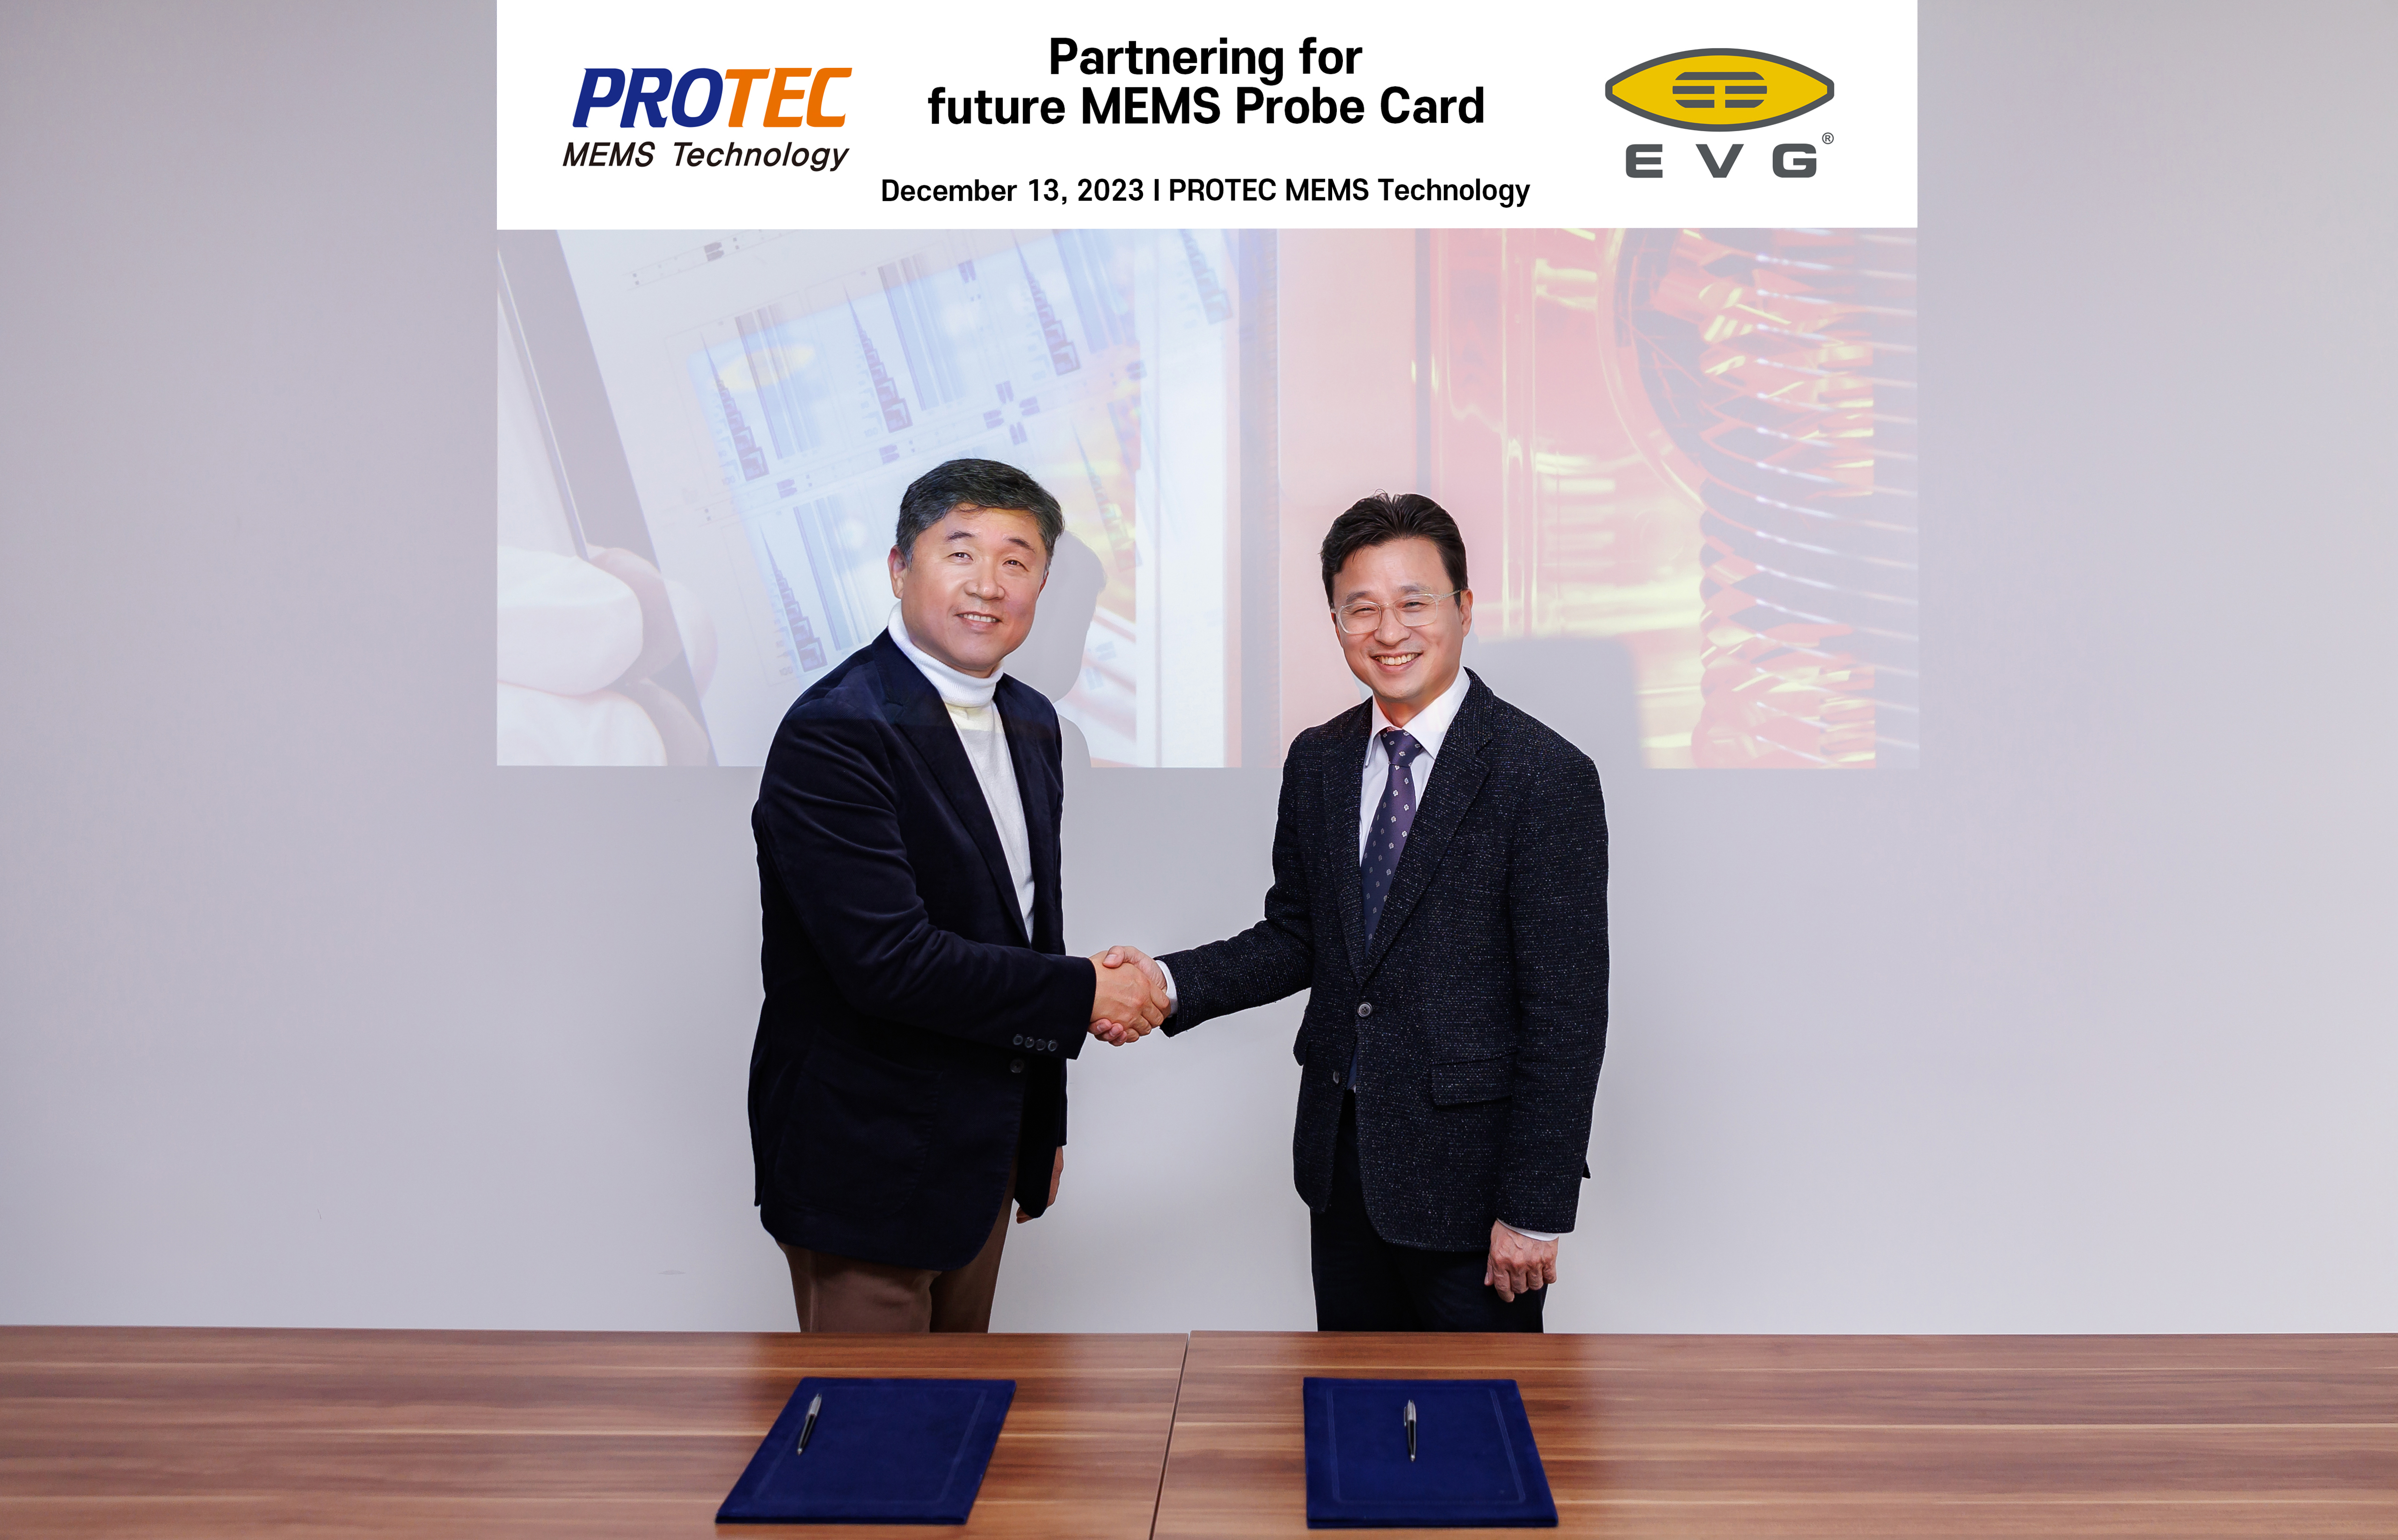 PROTEC MEMS Technology (PMT) and EV Group sign agreement on maskless lithography for advanced wafer memory probe card manufacturing. Shown here from left to right are Mr. Yong-Ho Cho, CEO of PMT, and Mr. Young-Sik Yun, general manager of EV Group Korea.